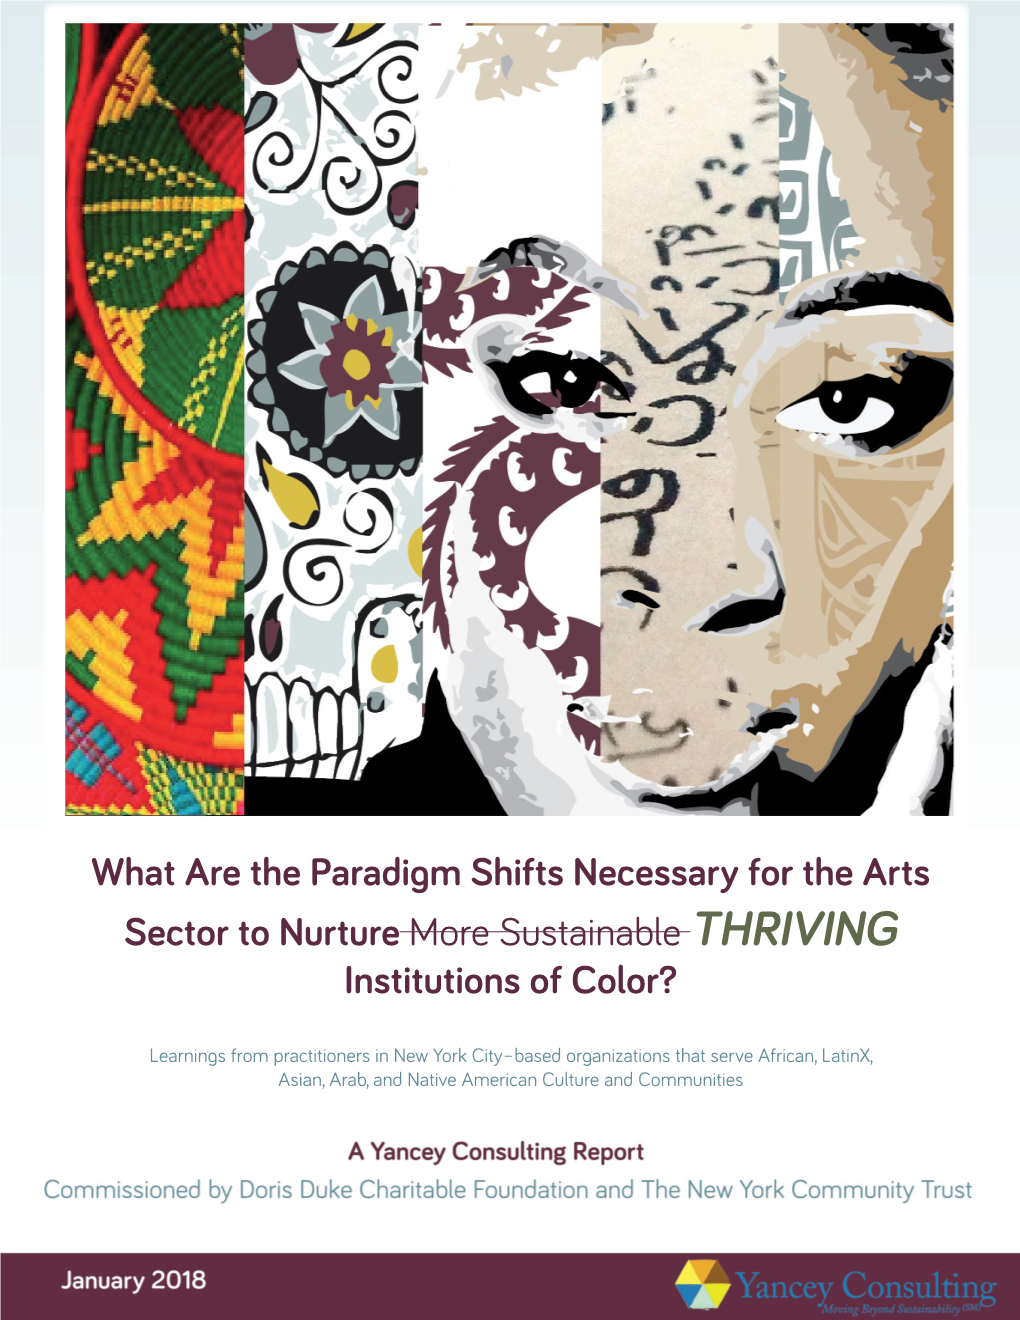 What Are the Paradigm Shifts Necessary for the Arts Sector to Nurture More Sustainable THRIVING Institutions of Color?